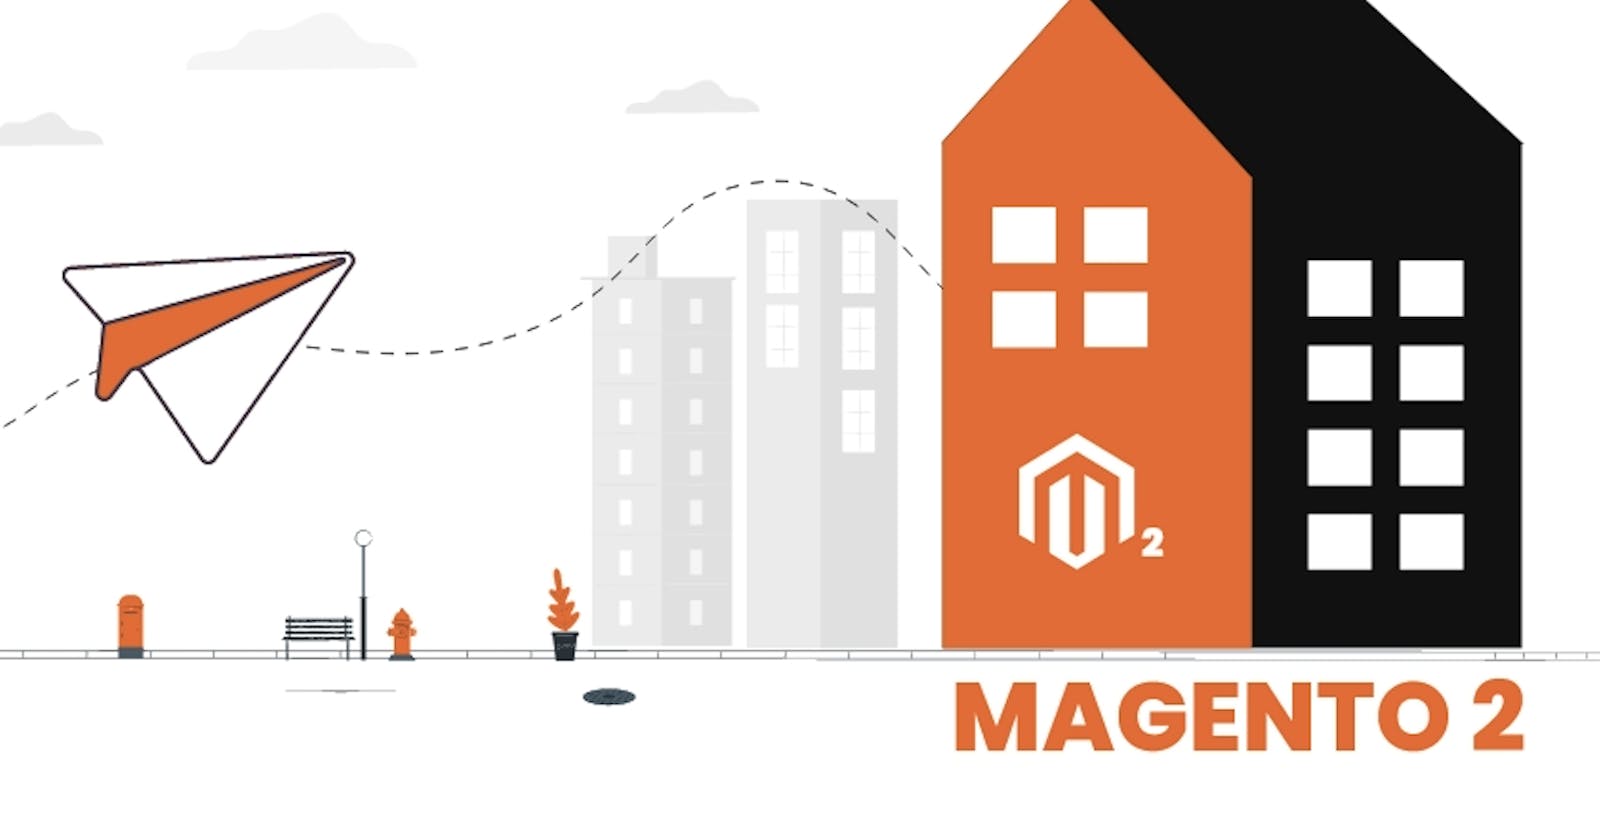 Why Is It Essential To Migrate To Magento 2?